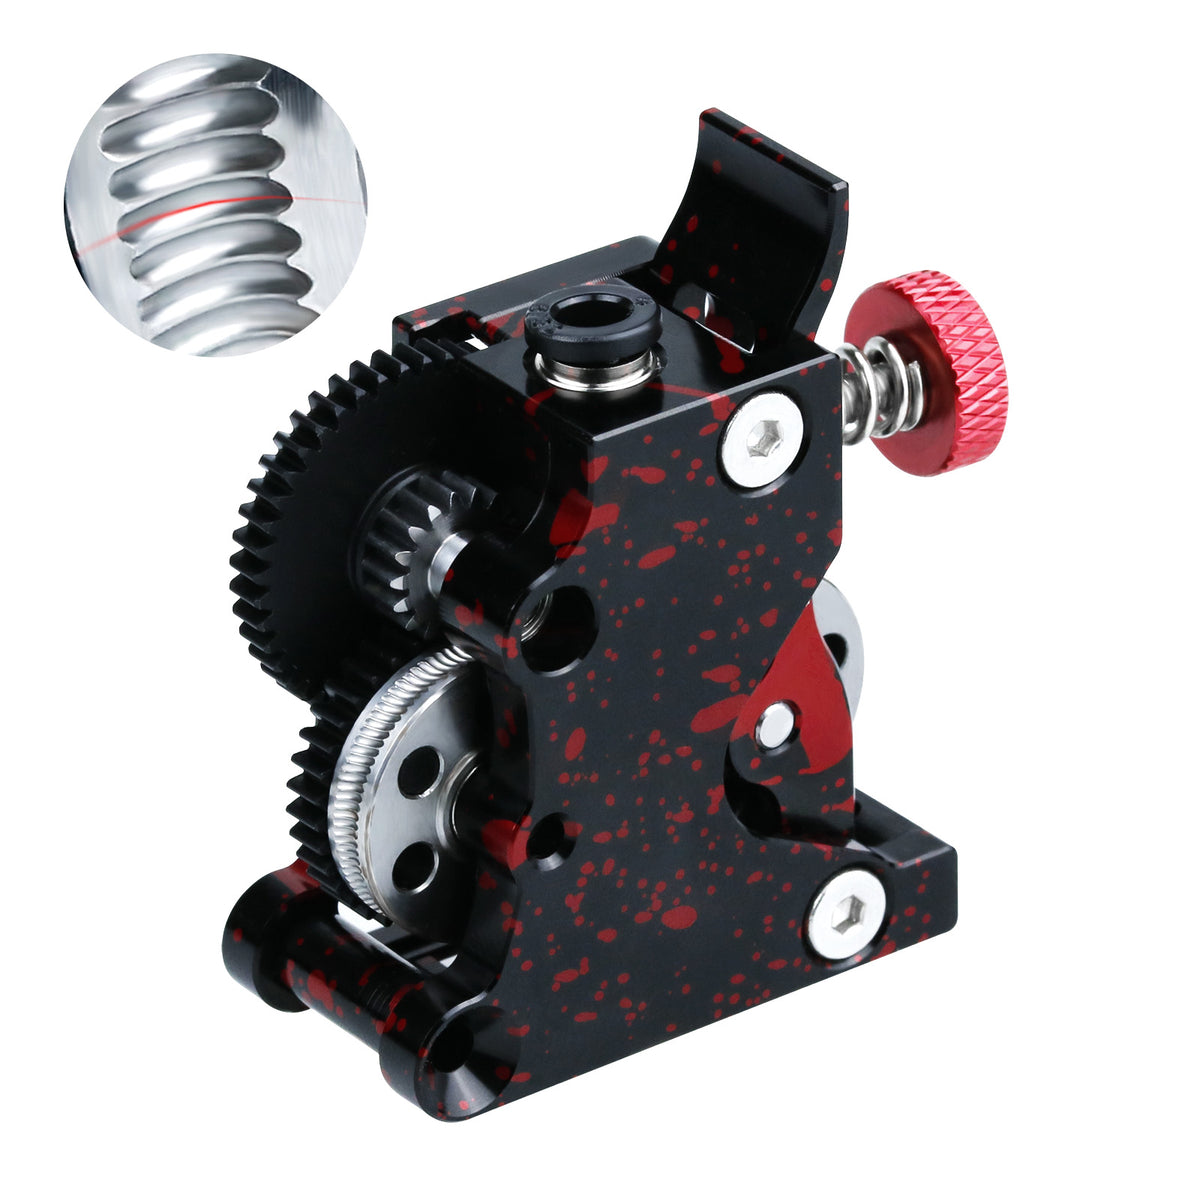 HGX Large Gear Helical Tooth Extruder